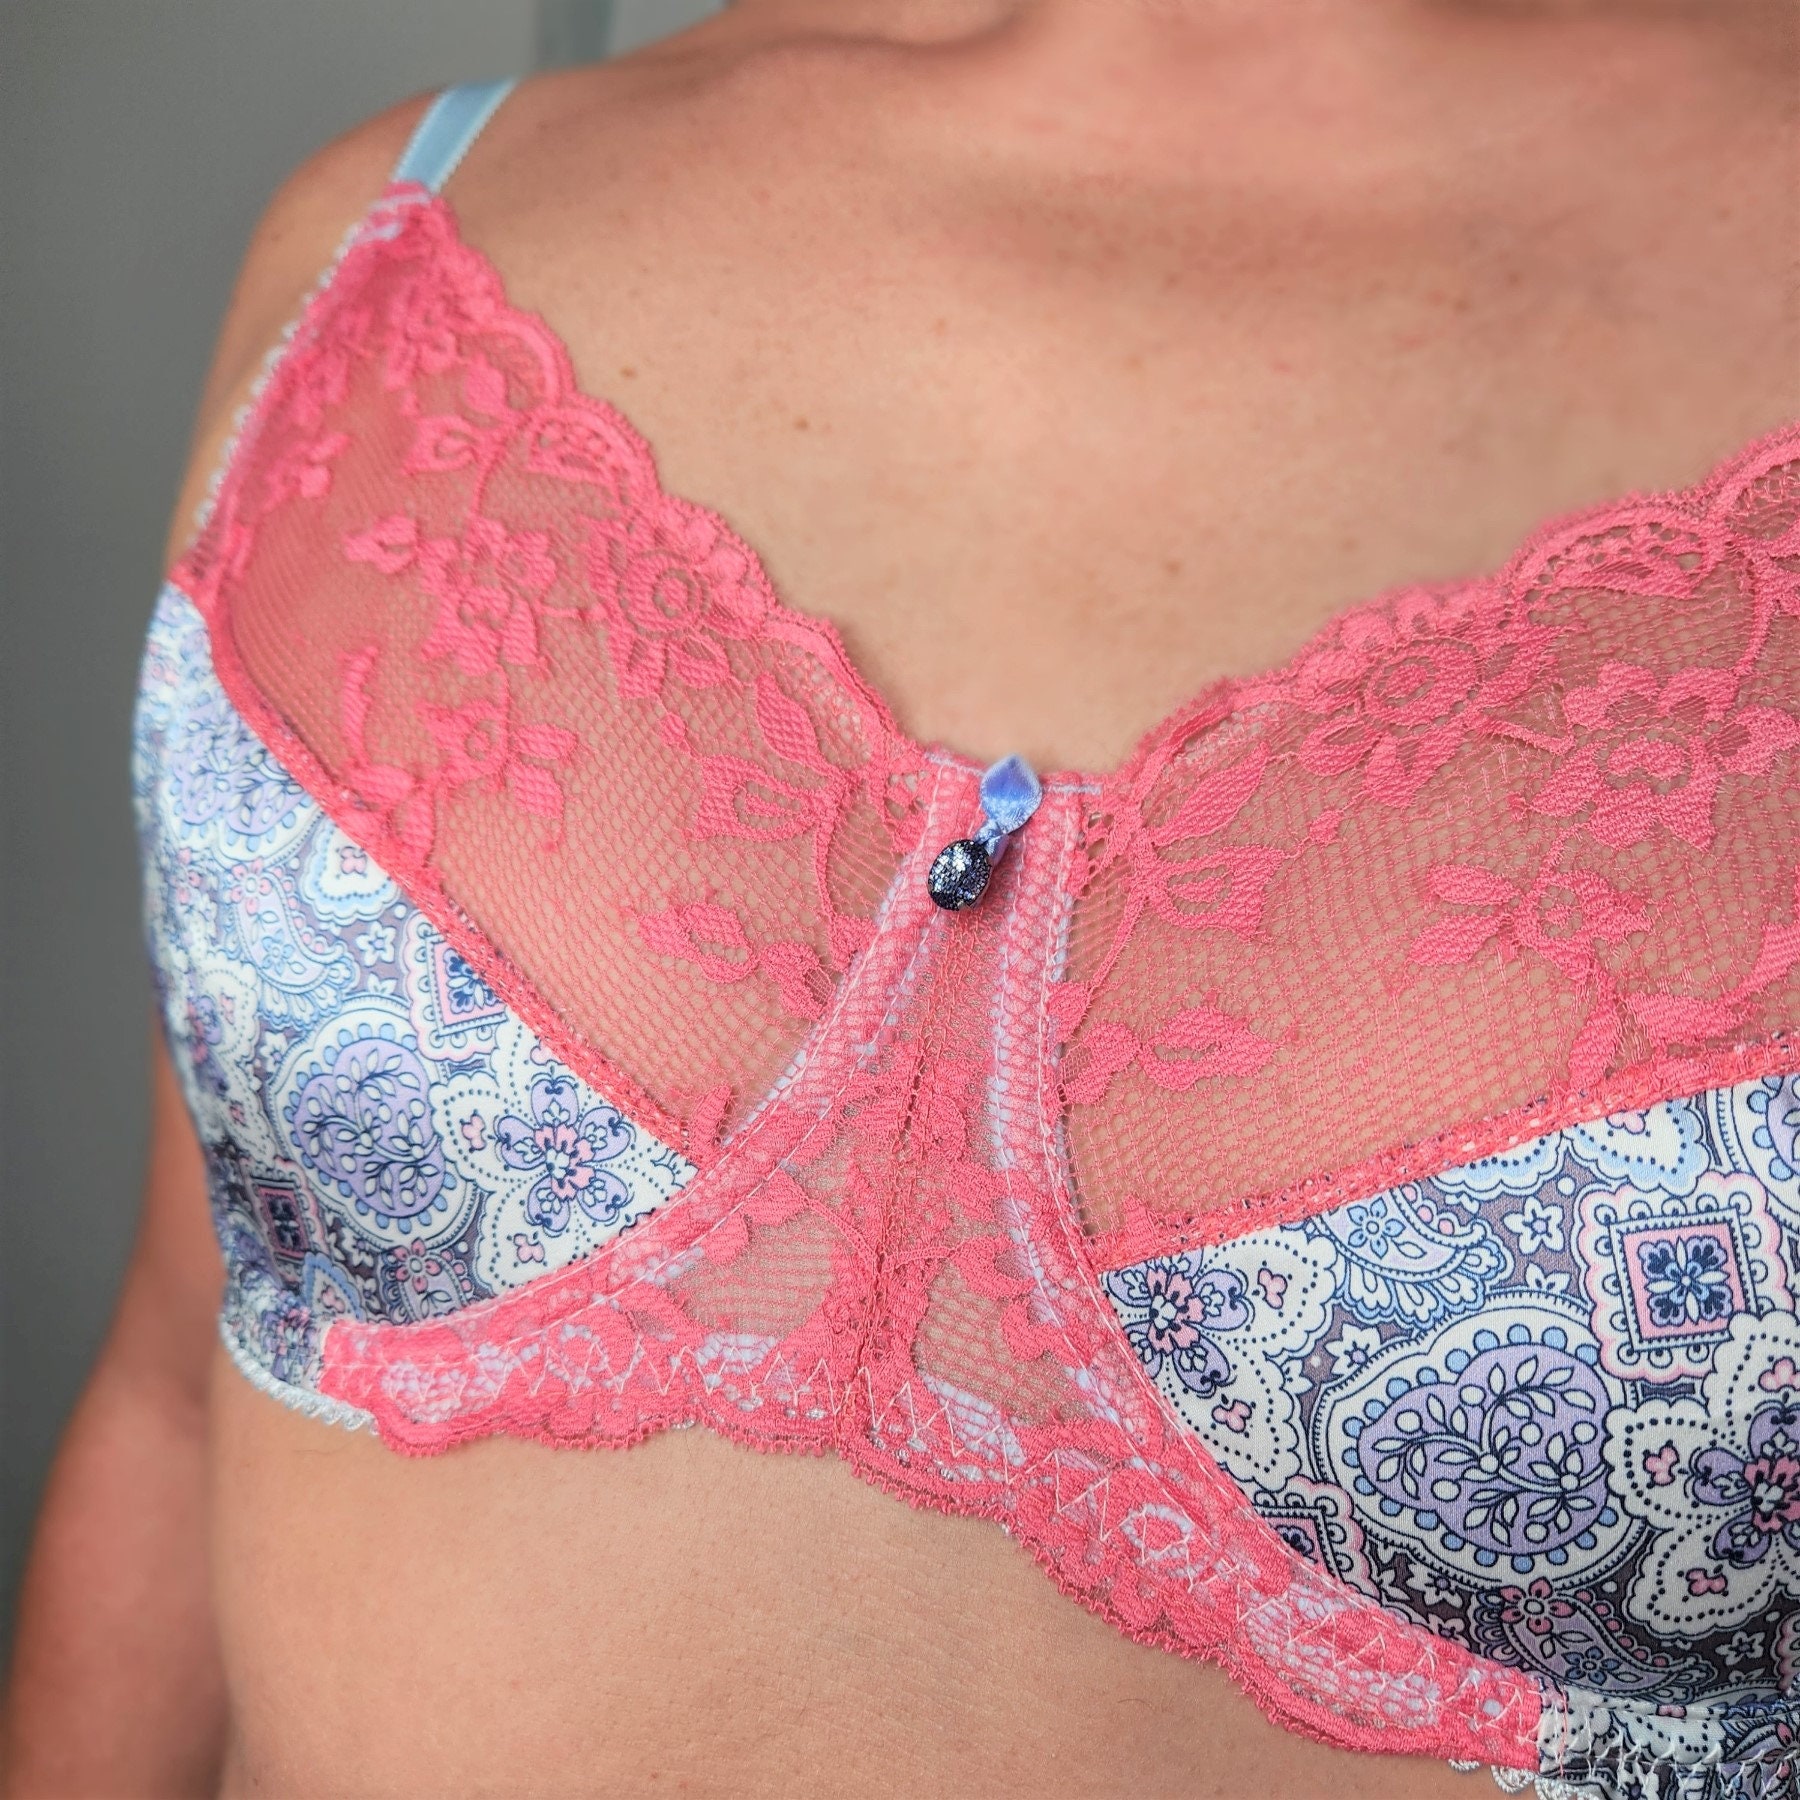 Buy Pink Lace Satin Bra for Men. Training Sissy Bras. Male Lace Lingerie.  Online in India 